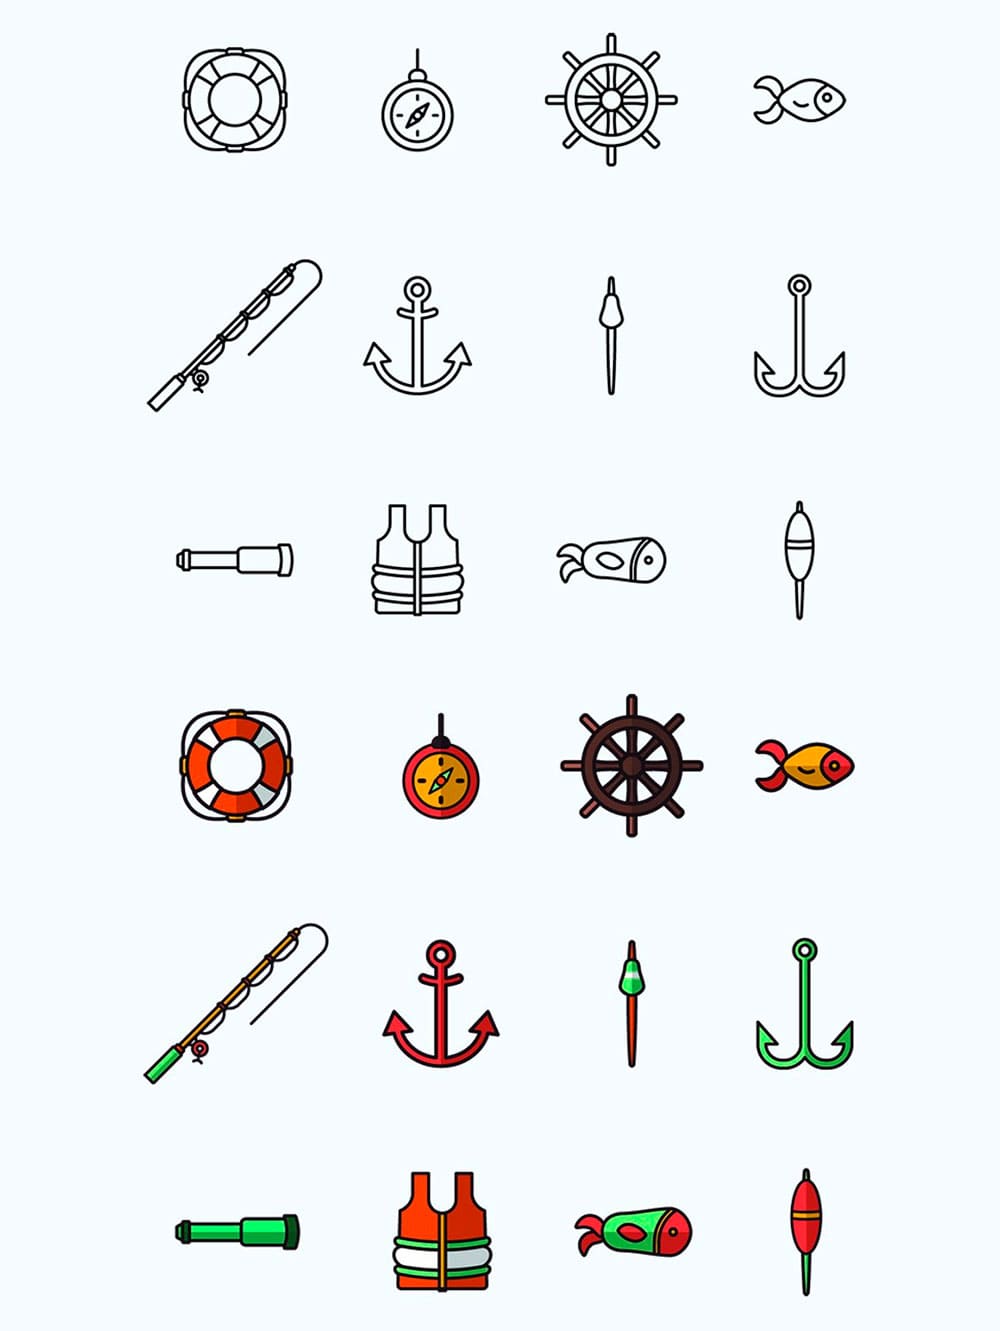 Fisherman icons, picture for pinterest.